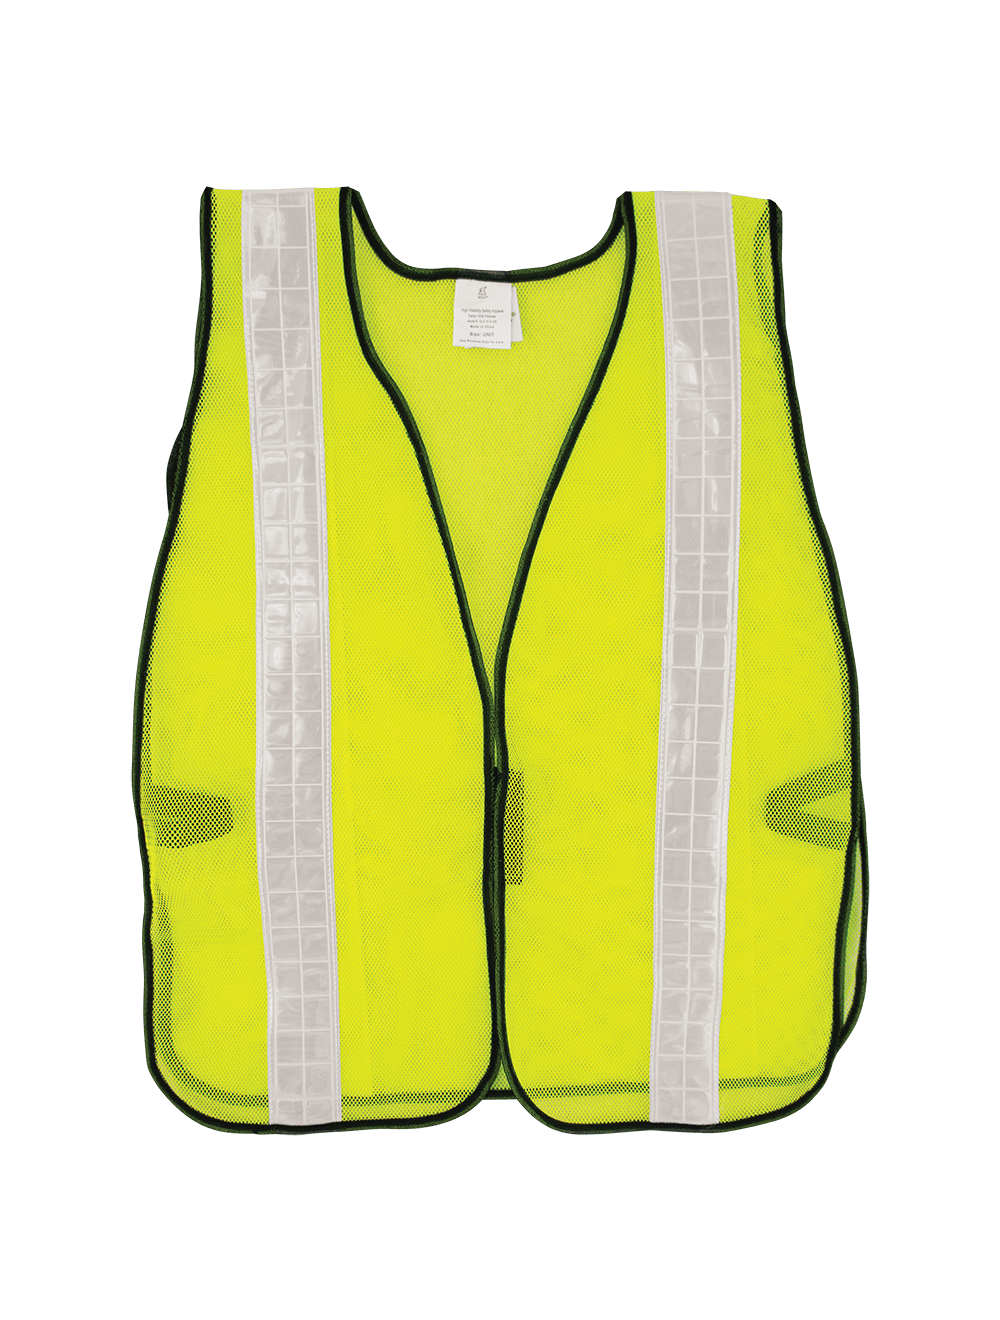 FrogWear® HV Enhanced Visibility Yellow/Green Economy Mesh Safety Vest with Wide Reflective - GLO-10-G-2IN